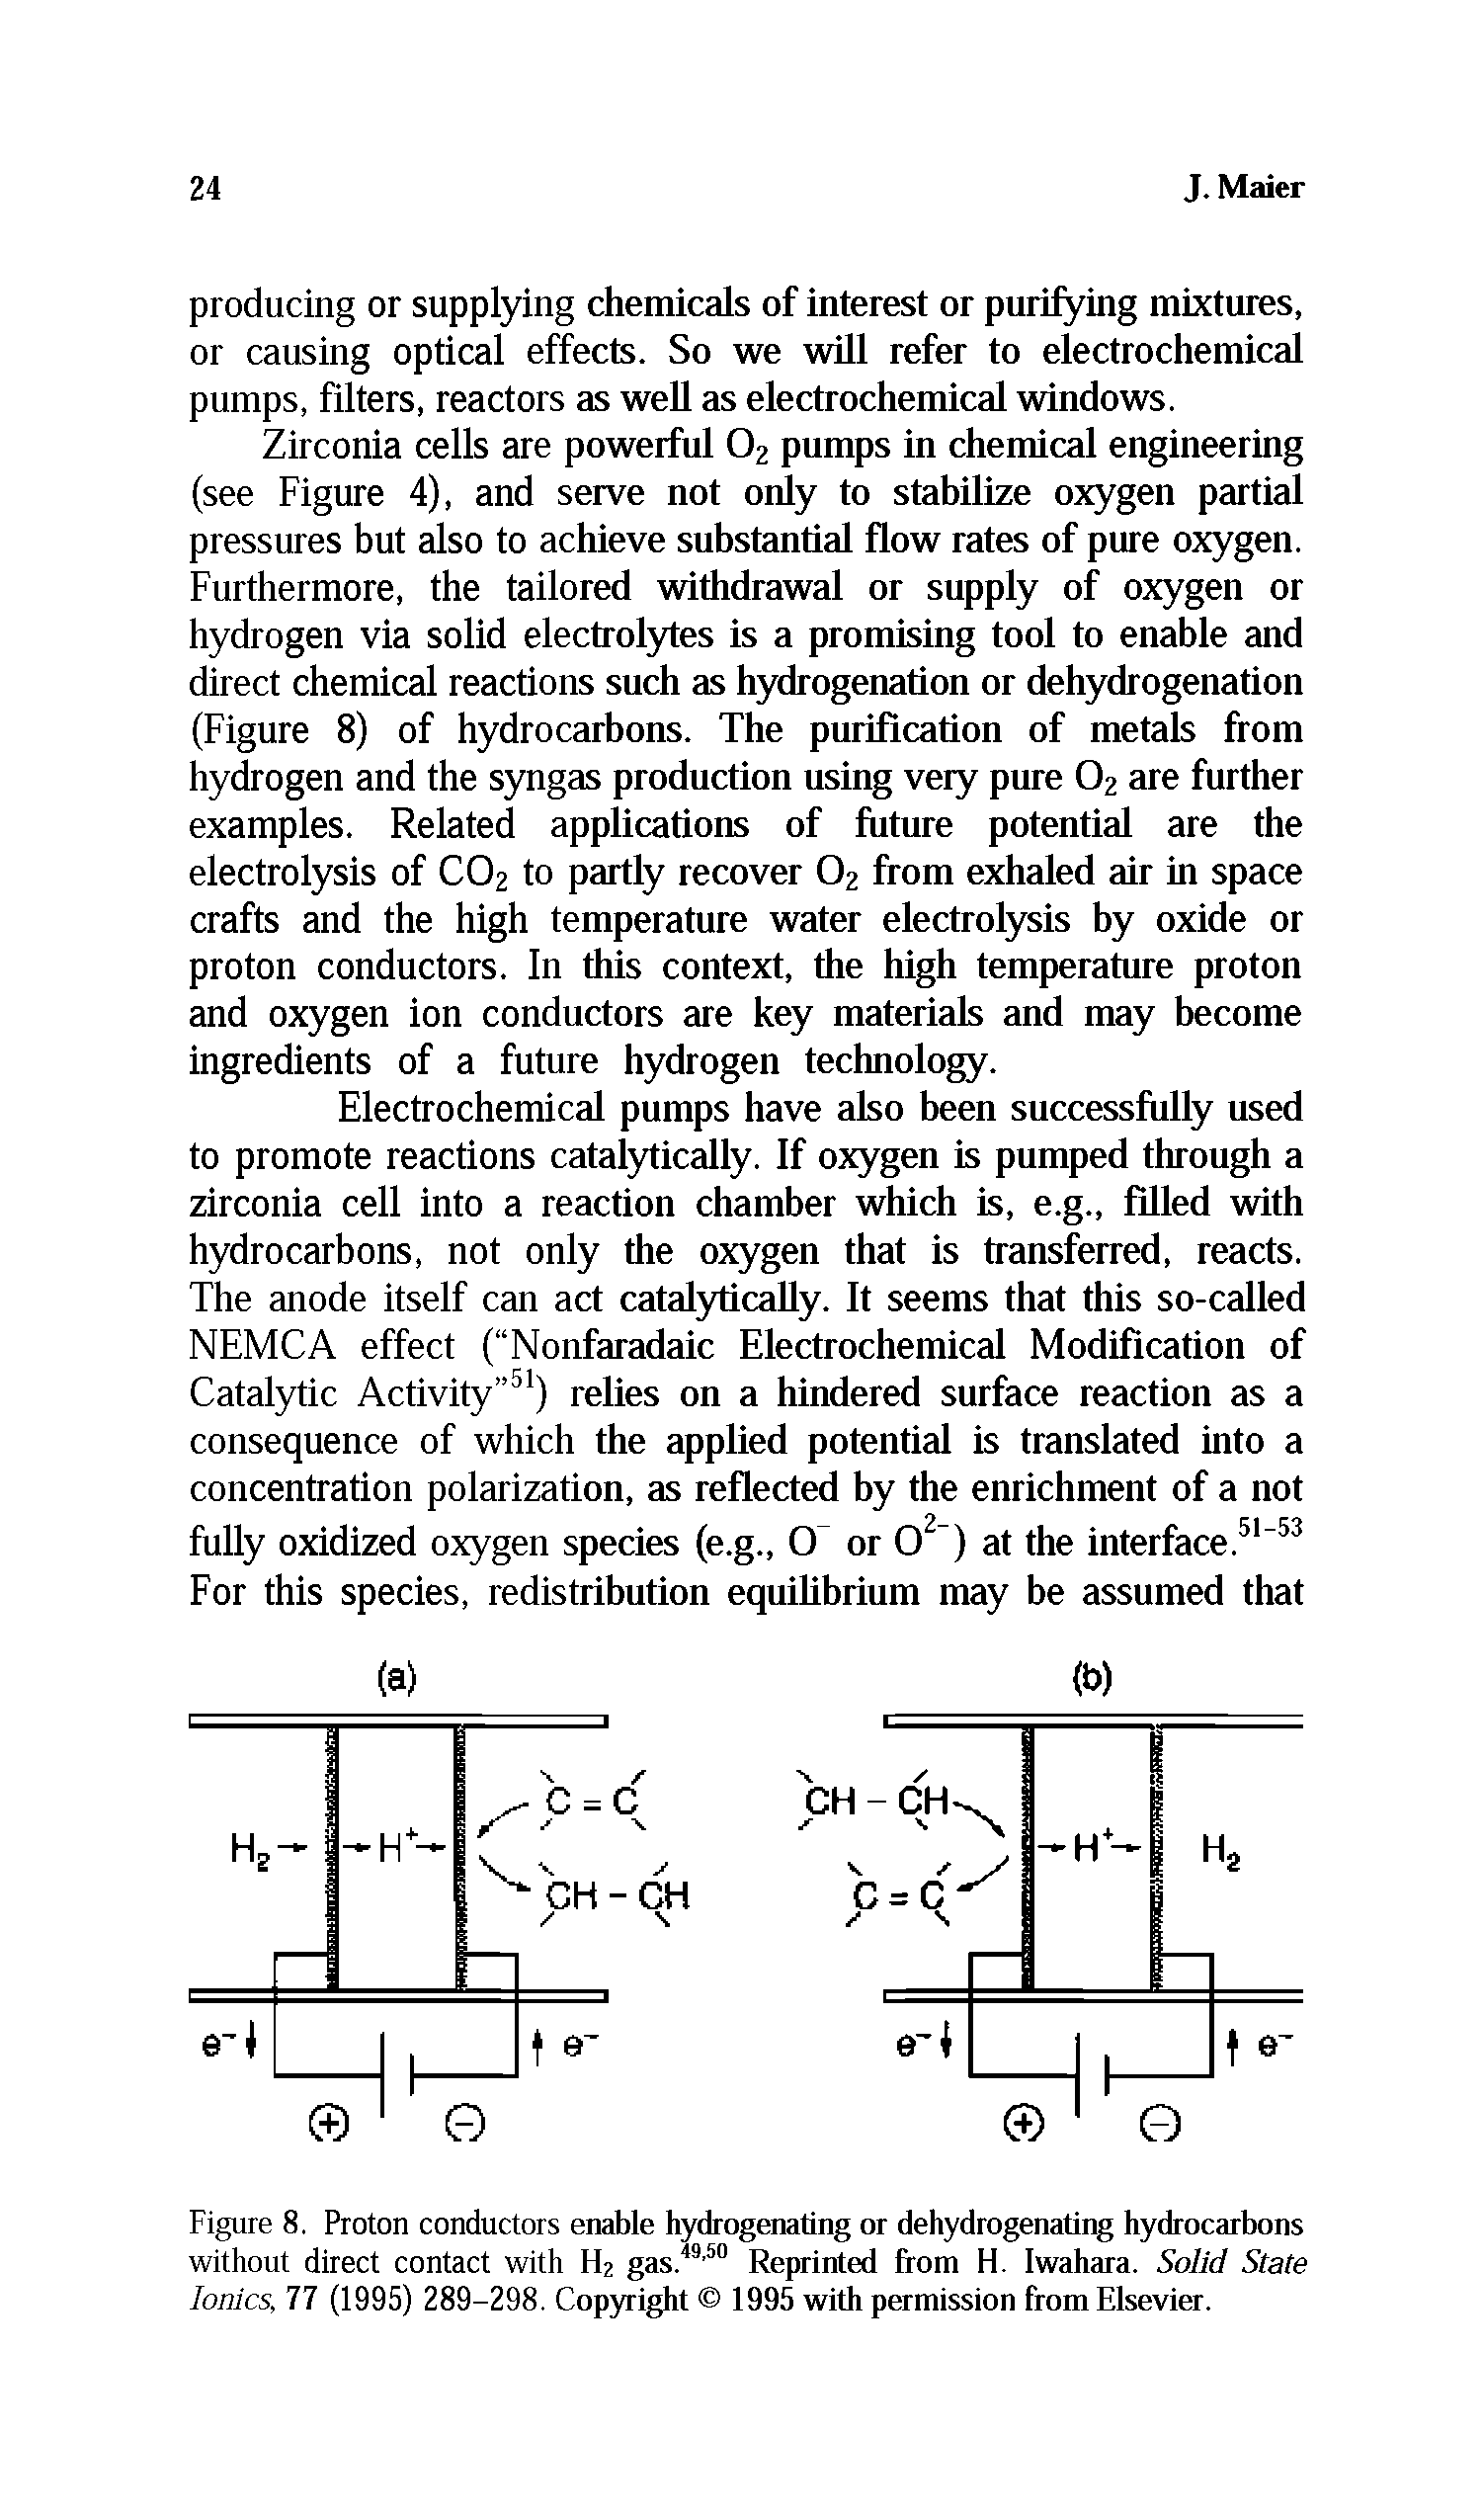 Figure 8. Proton conductors enable hydrogenating or dehydrogenating hydrocarbons without direct contact with H2 gas.49,50 Reprinted from H. Iwahara. Solid State Ionics, 77 (1995) 289-298. Copyright 1995 with permission from Elsevier.